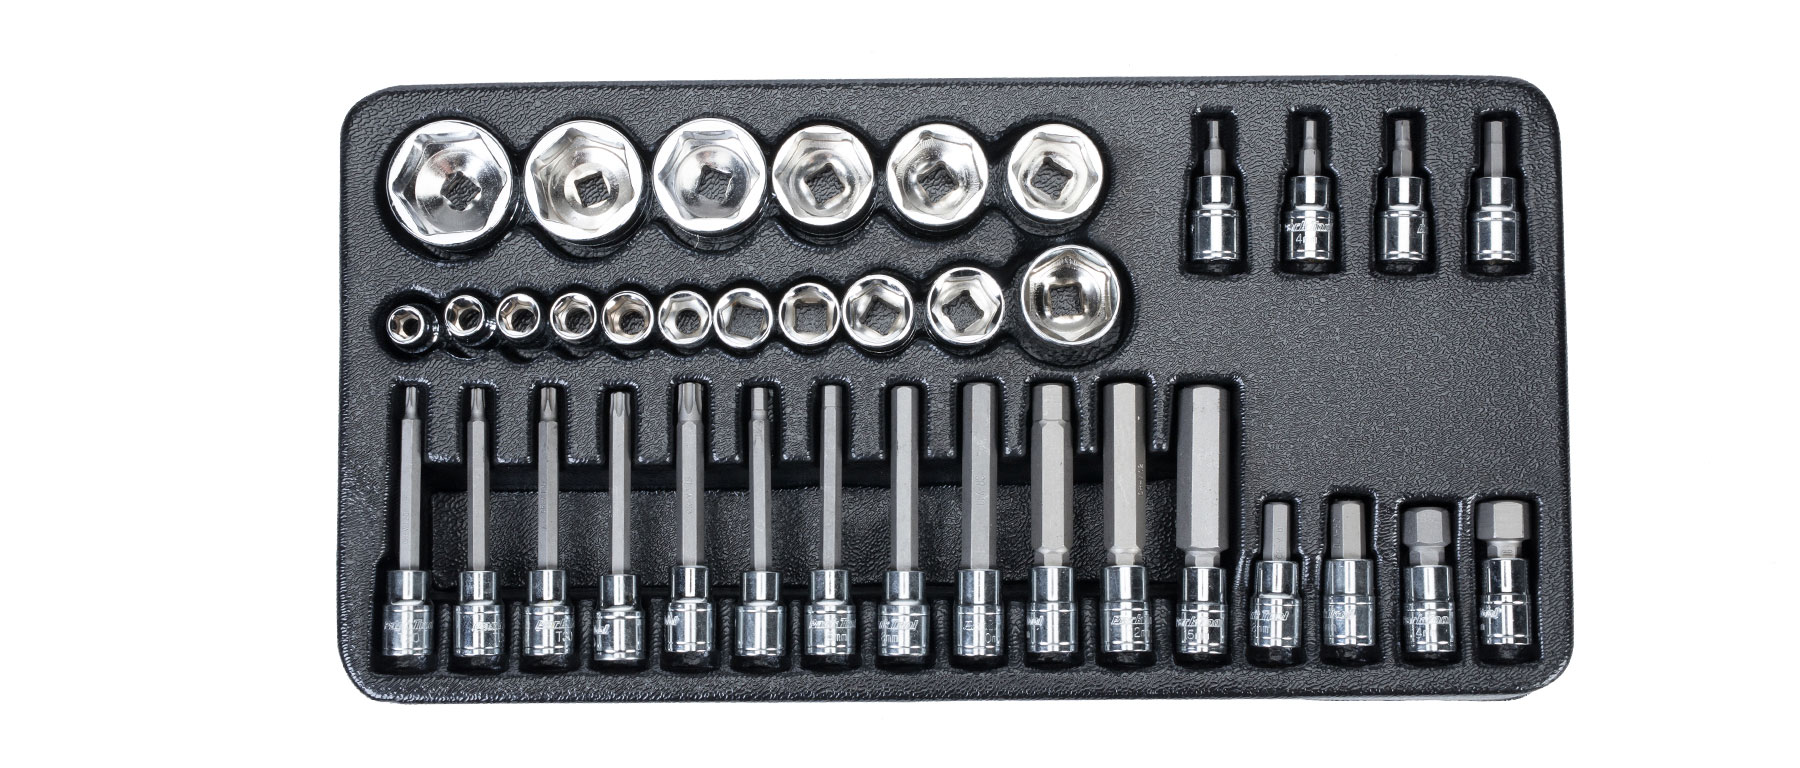 Park Tools Sbs-3 Socket and Bit Set Bicycle Tool for sale online 